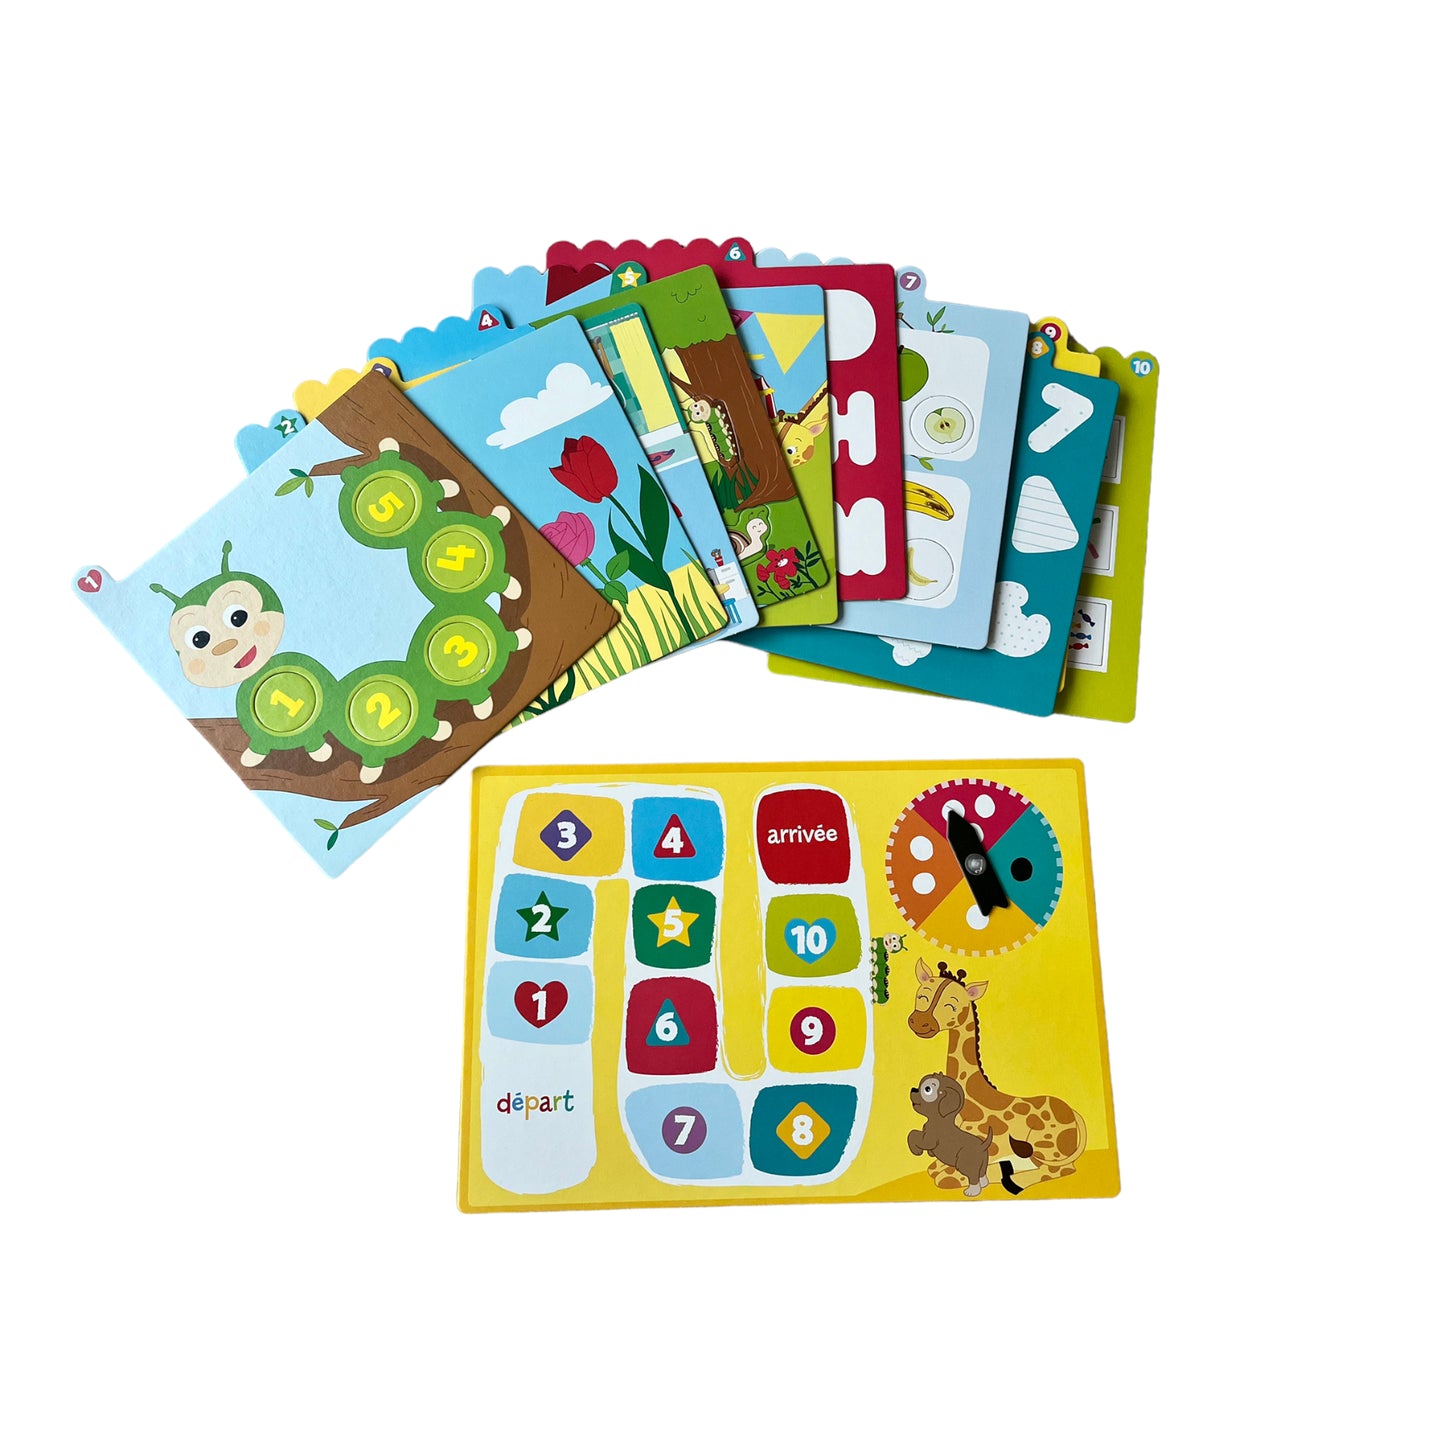 Ravensburger - My games for toddler - More than 20 activities to learn and have fun